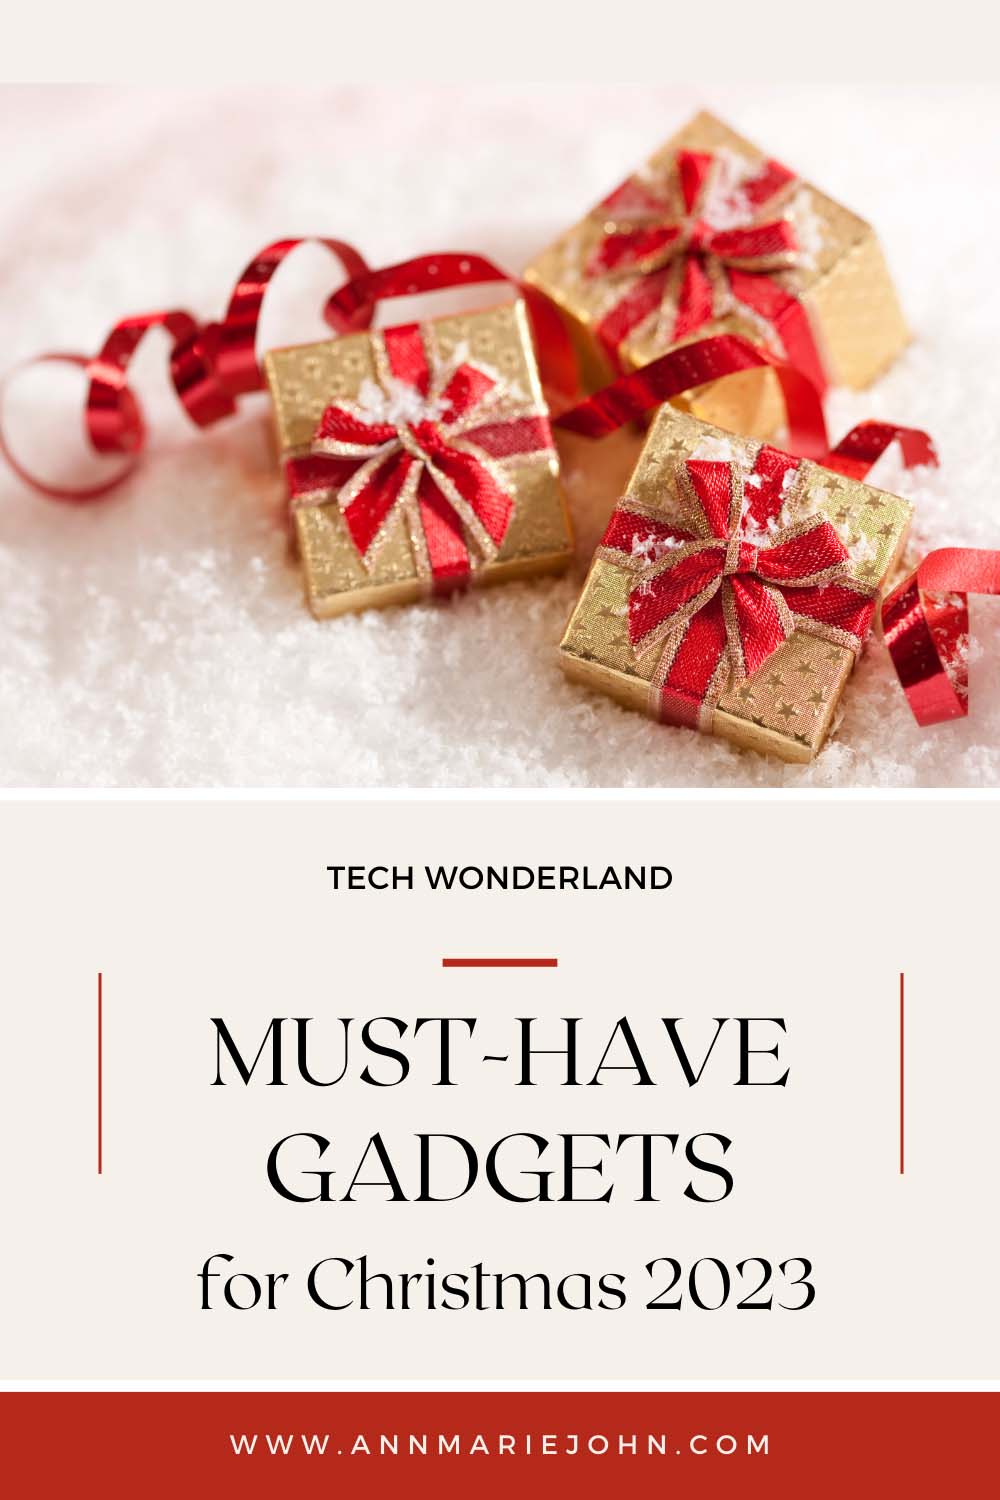 Tech Wonderland: Must-Have Gadgets for Christmas 2023